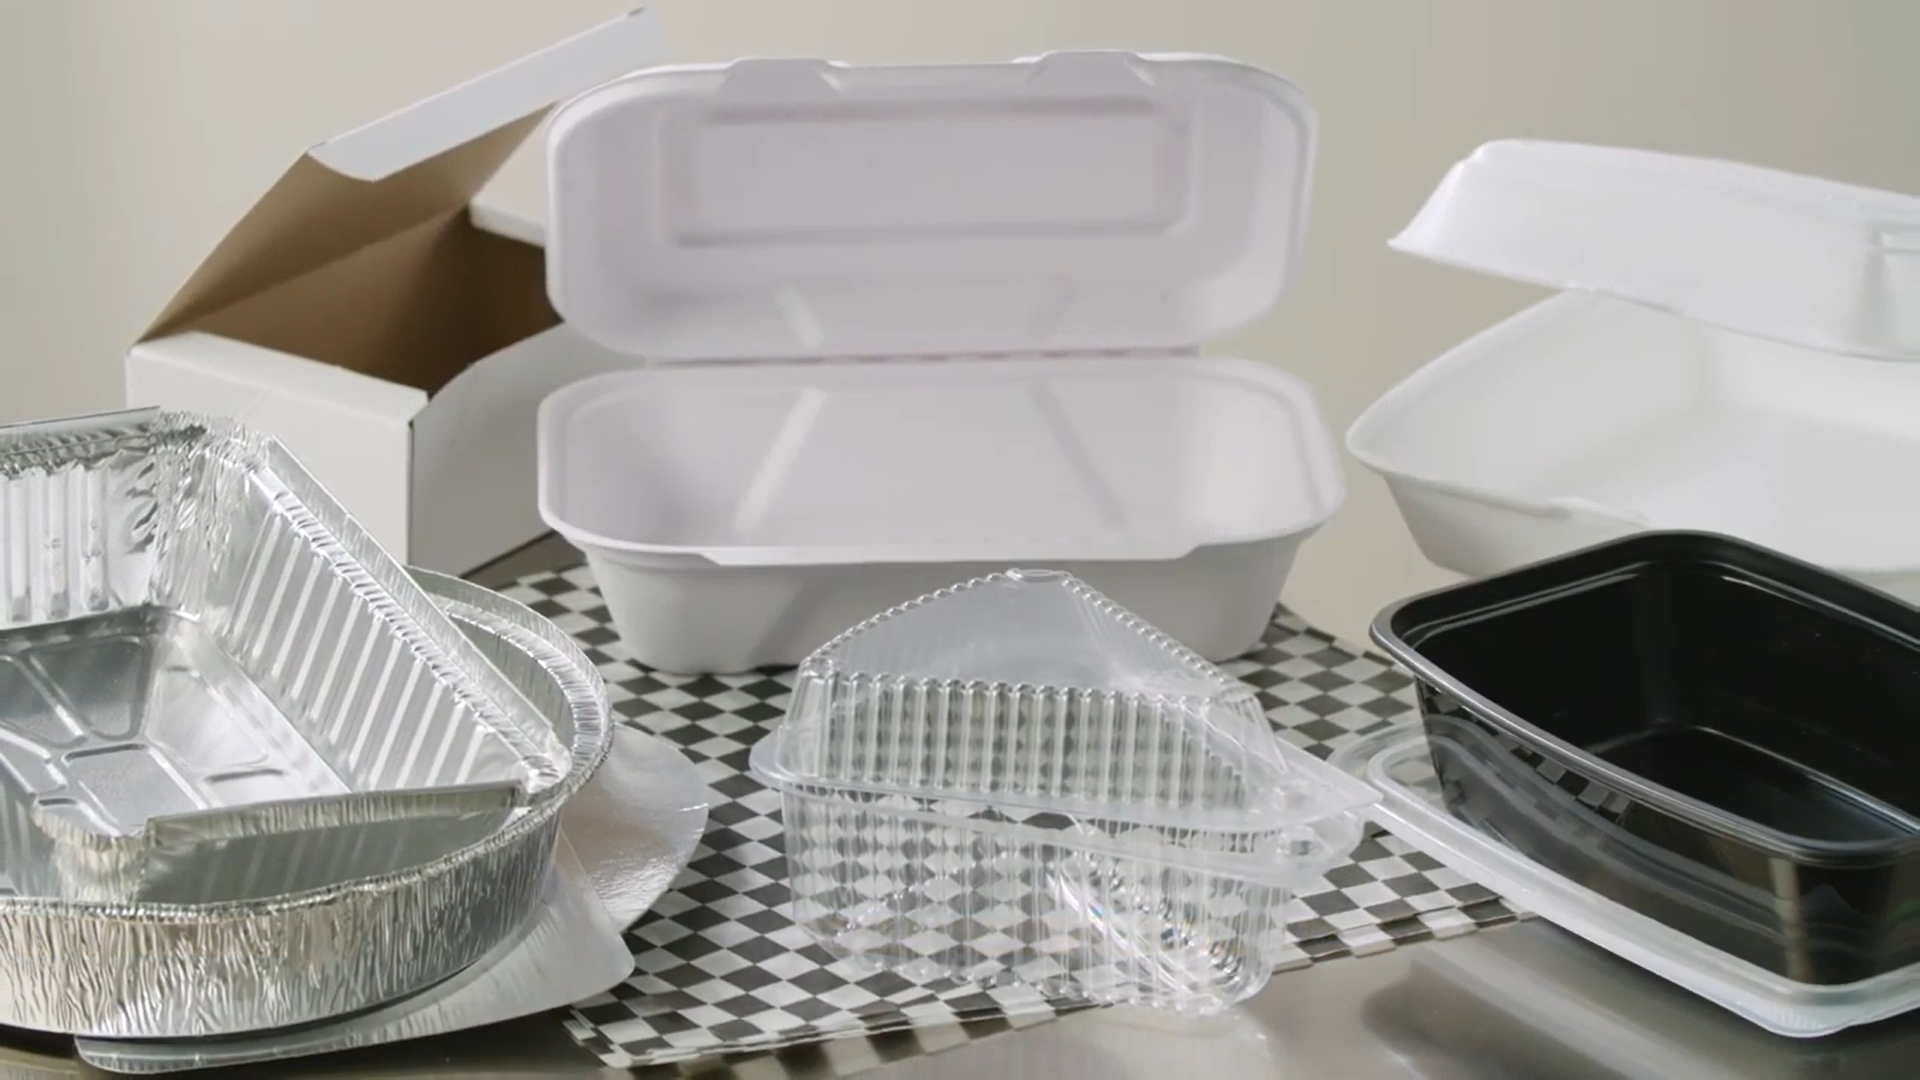 https://blog.wholesaleclub.ca/wp-content/uploads/2021/01/Takeout-Containers.png